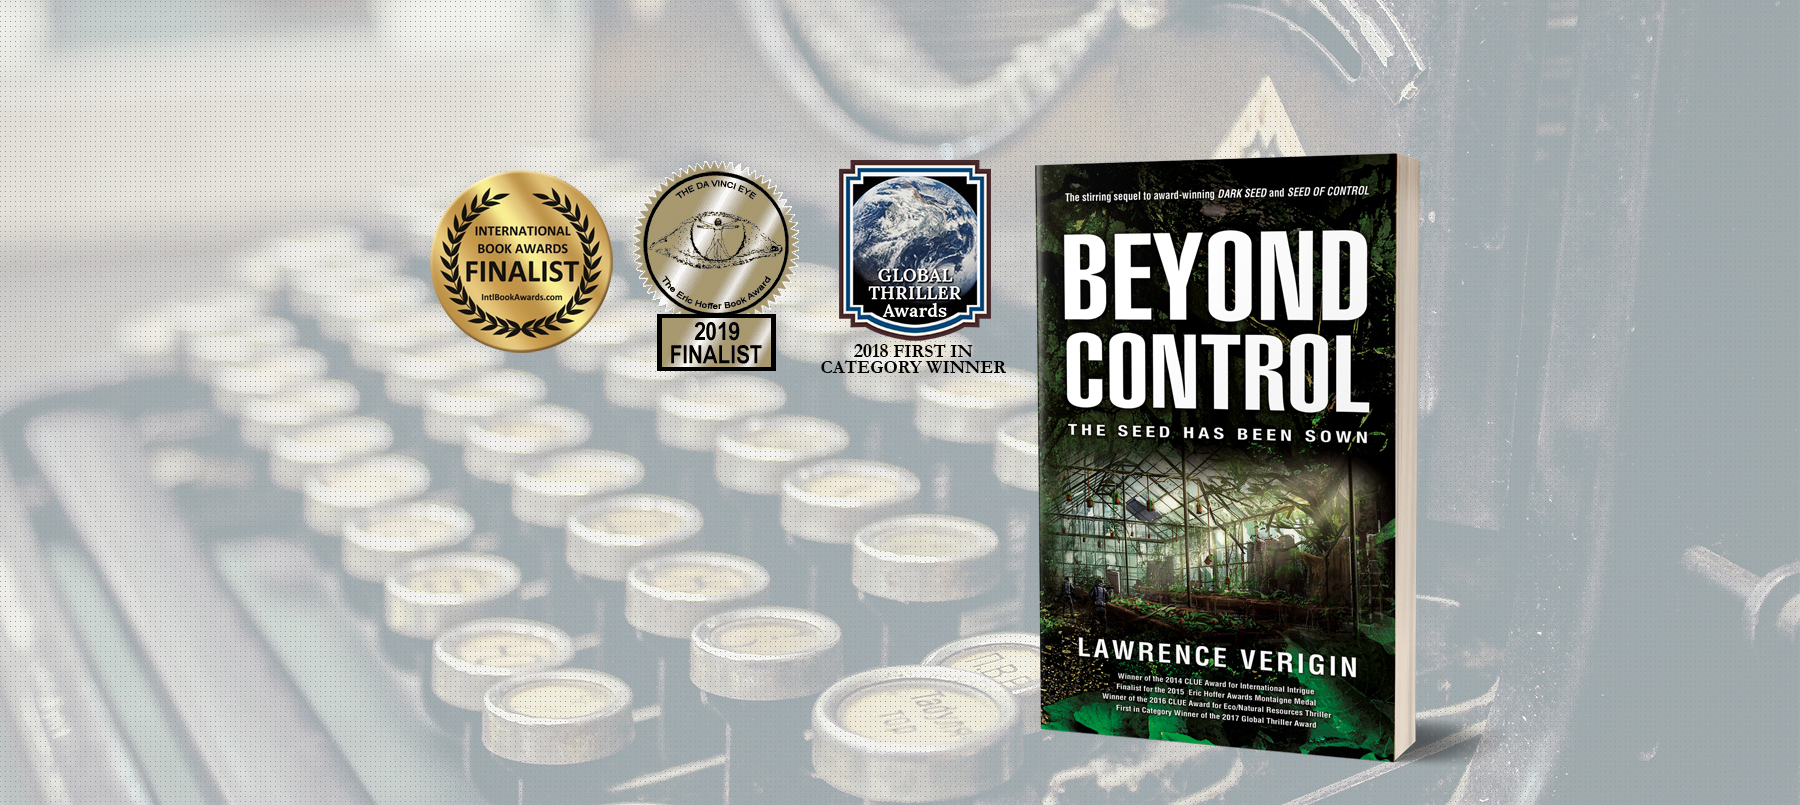 Lawrence Verigin - author of Beyond Control